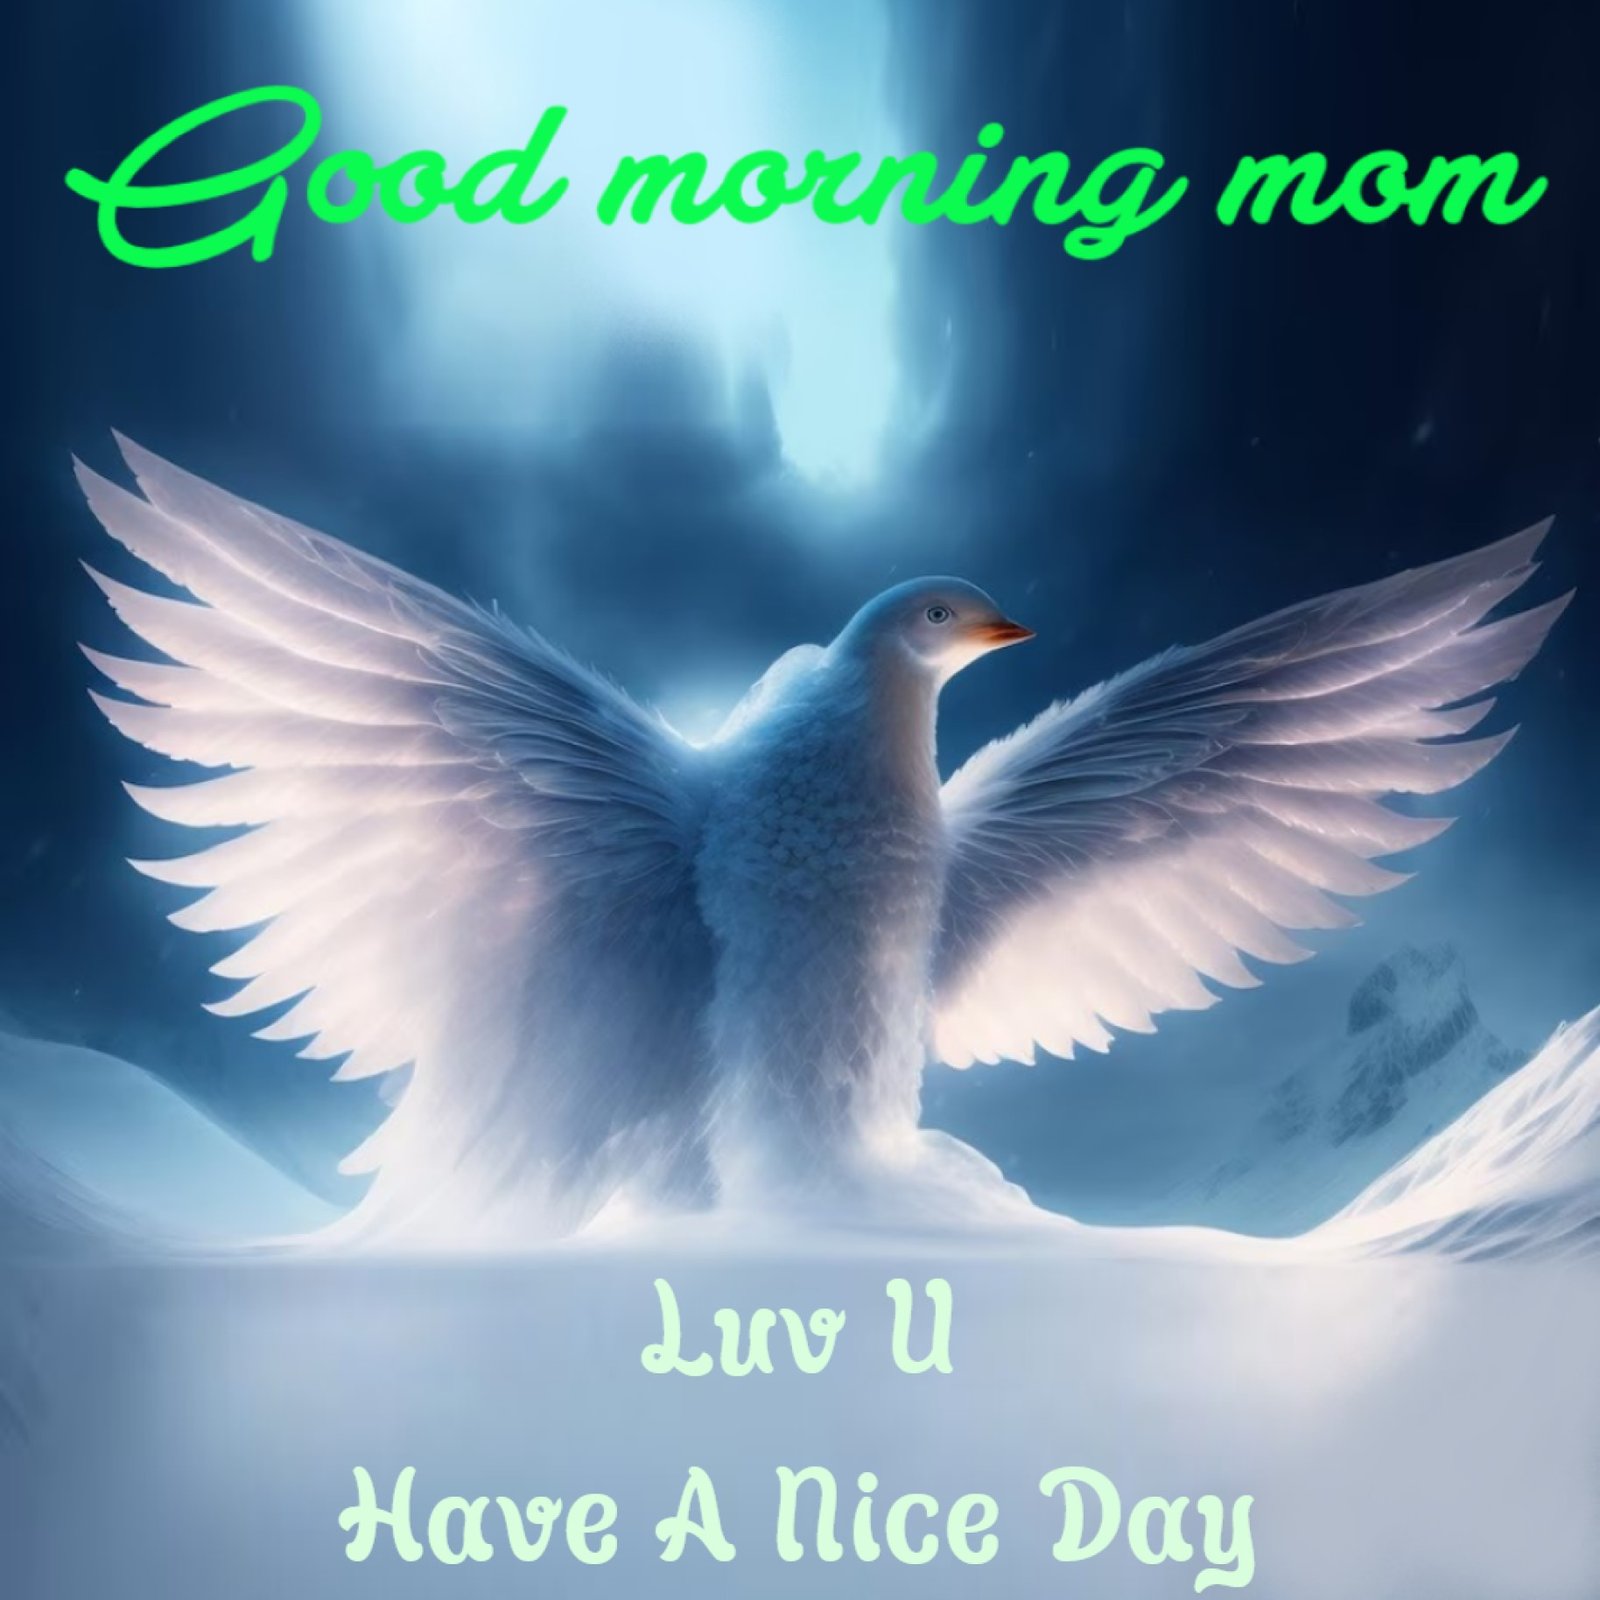 New Style Good Morning Mom Quotes 2023 Images Whatsapp Without Watermark Nice